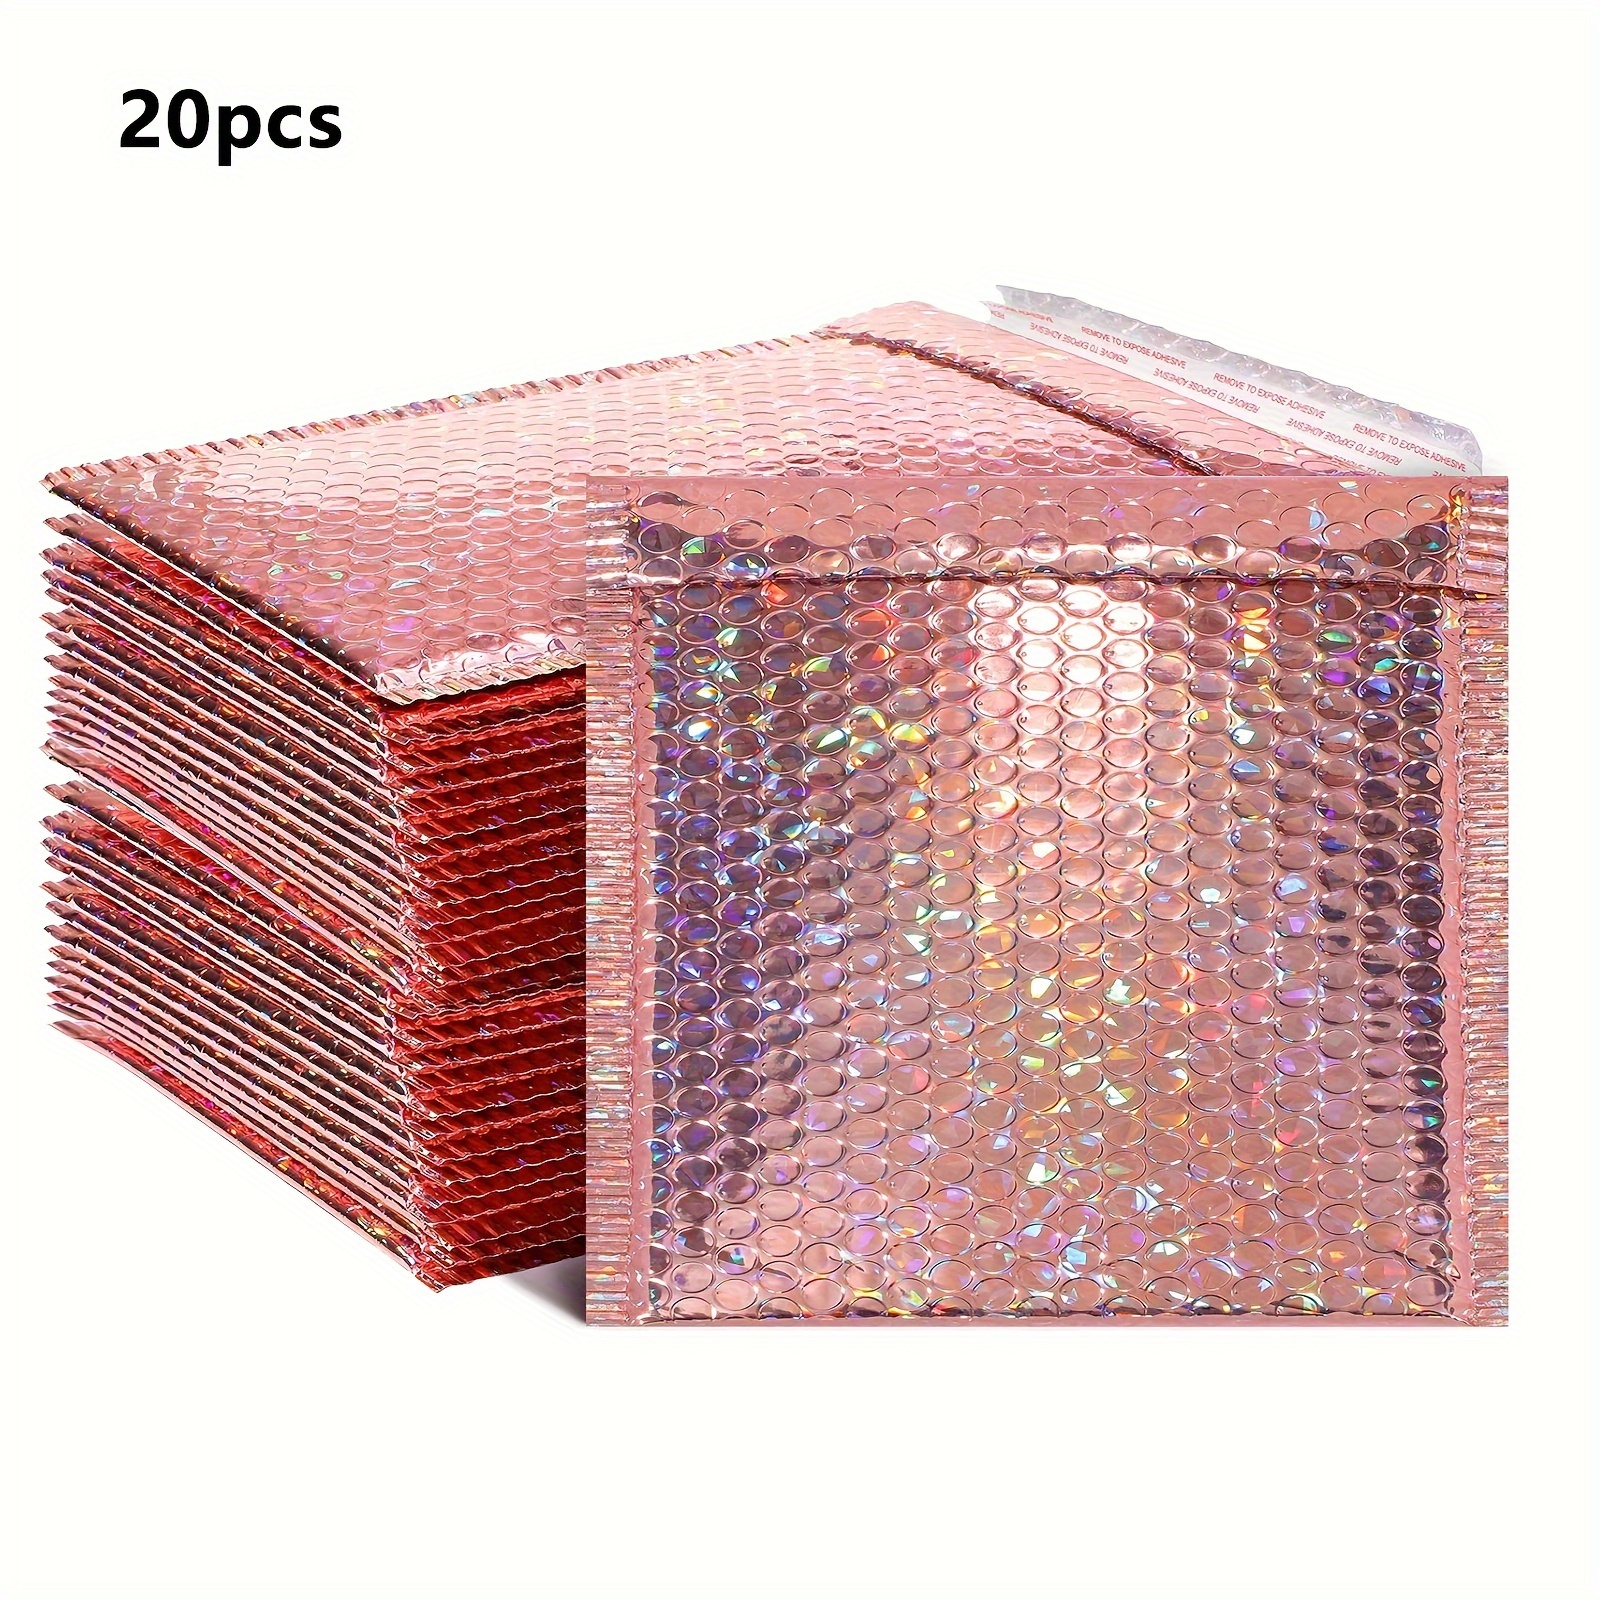 

20pcs Laser Bubble Packaging Pouches Stuffed Mailers Holographic Bubble Envelopes Jewelry Gifts For Mailing, Shipping Fashion Colored Small Business Supplies